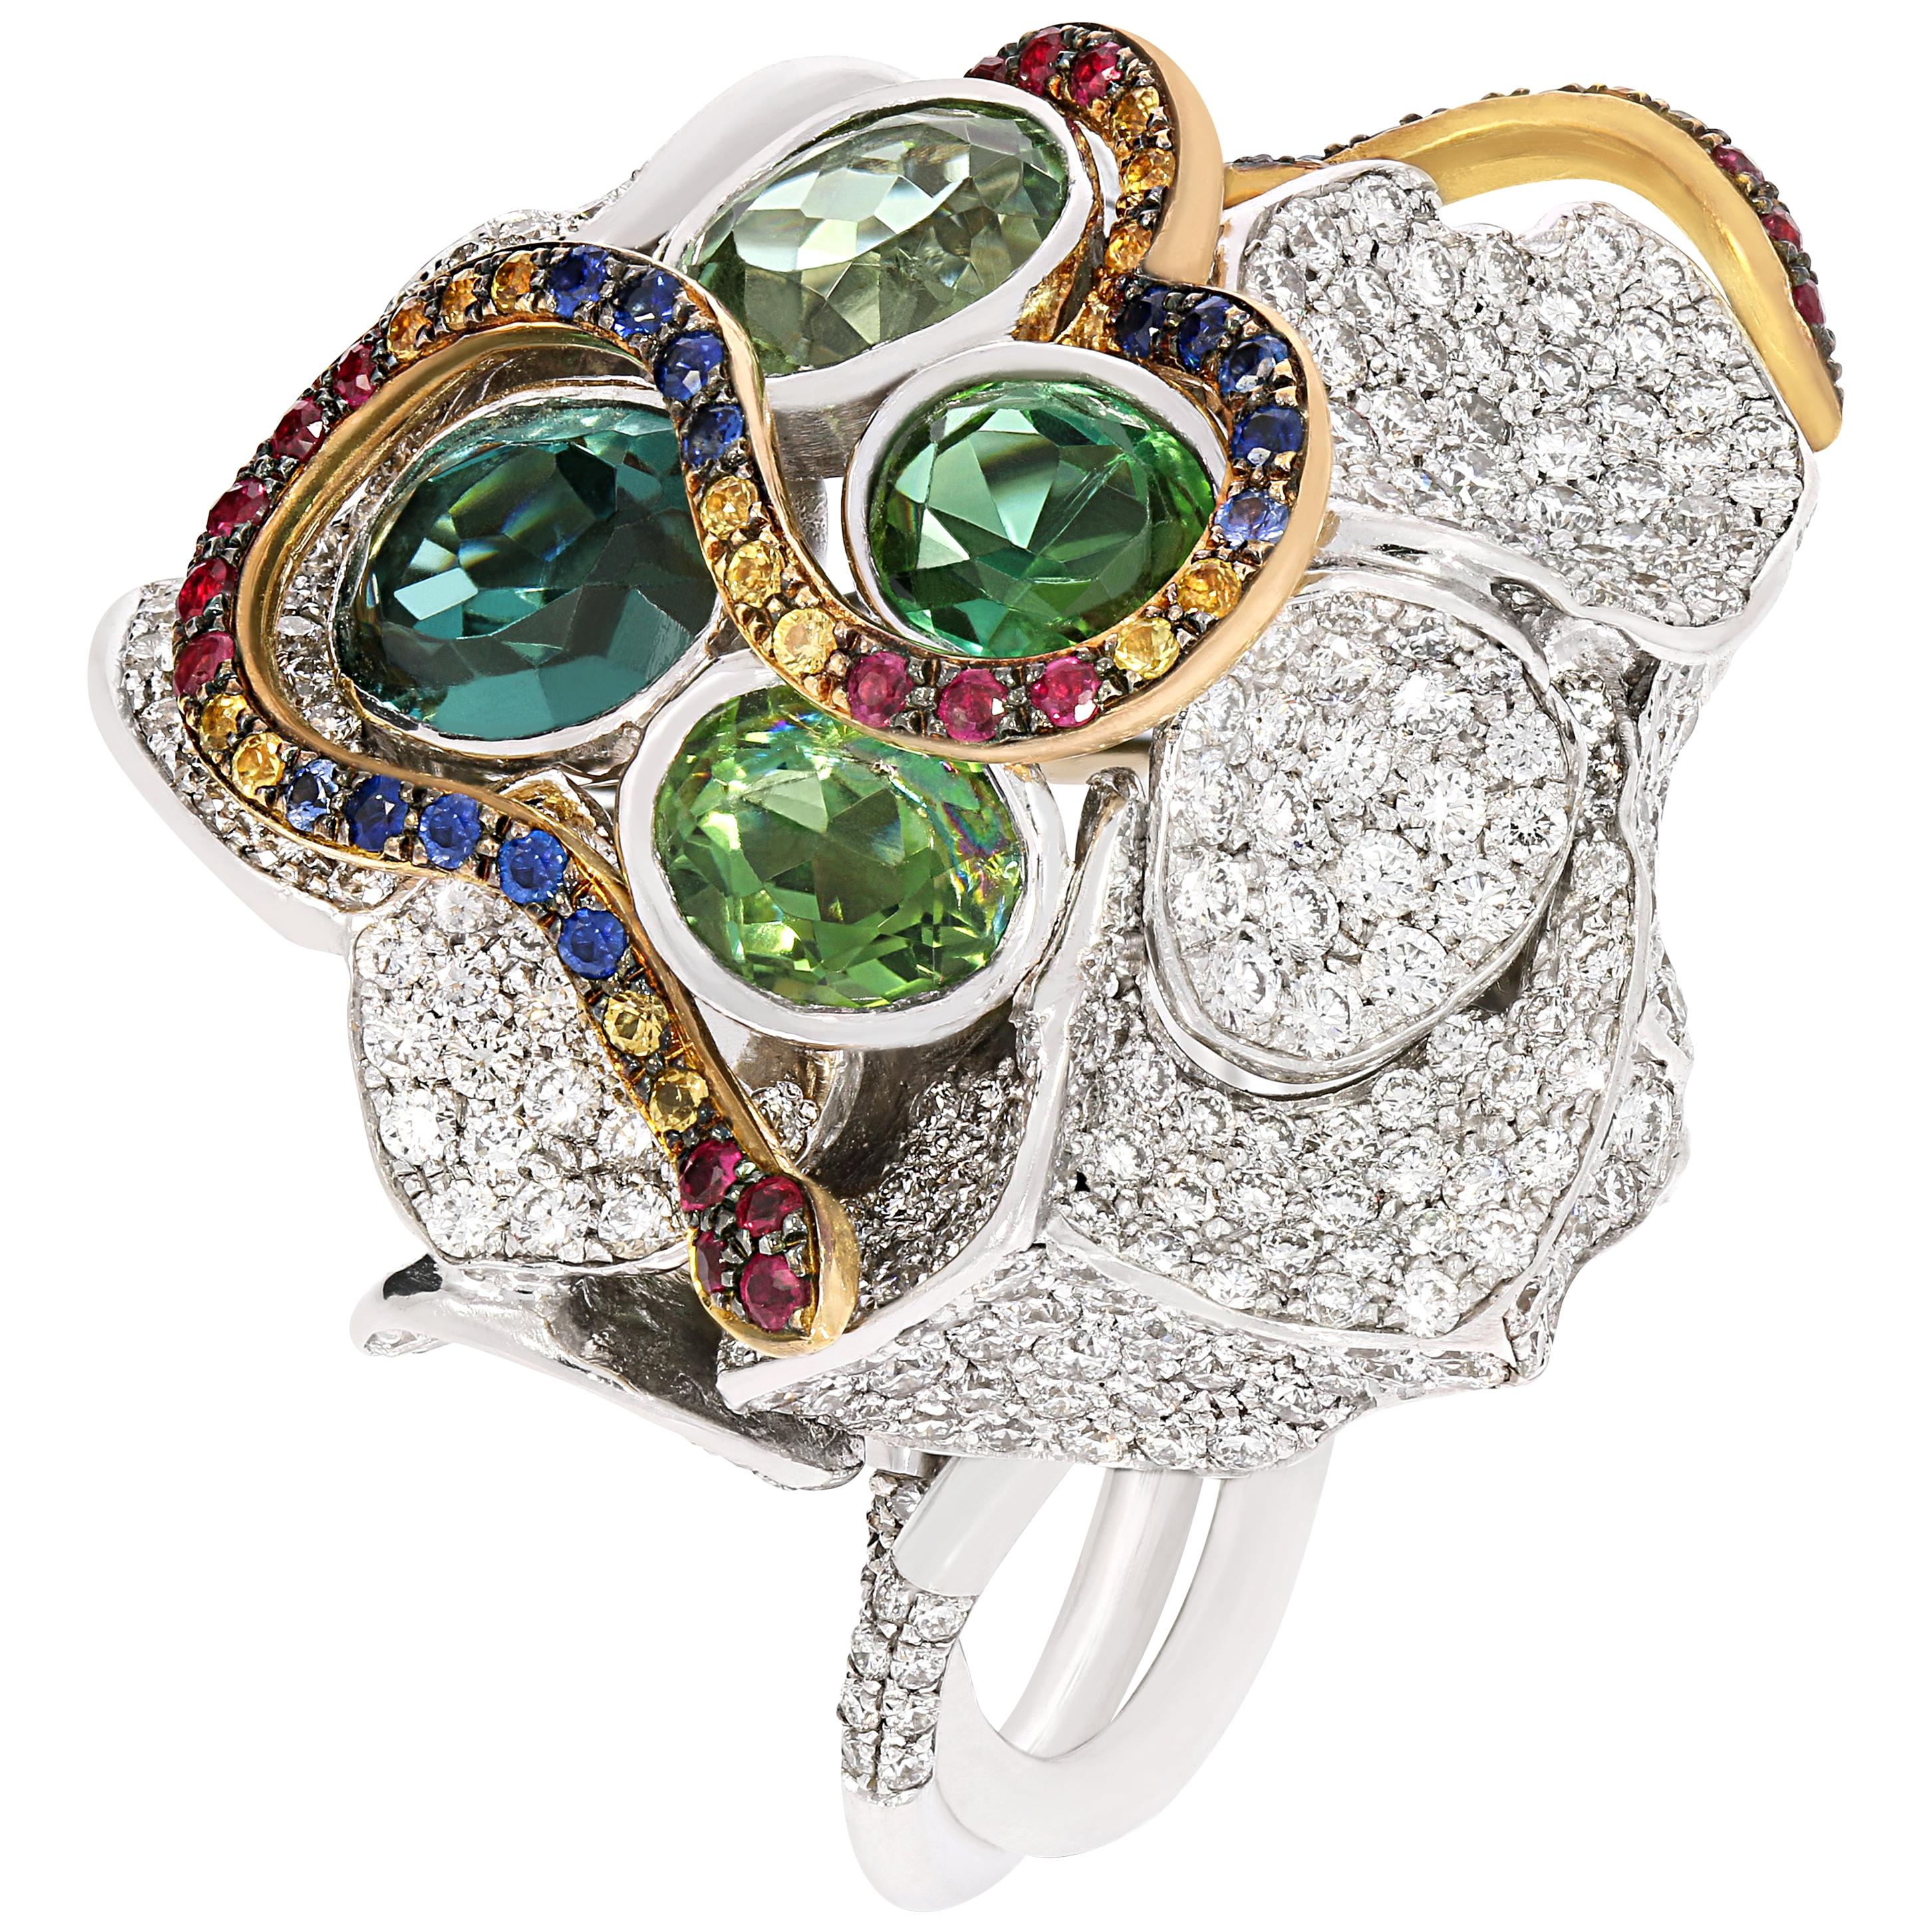 Rosior Multi-Color Gemstone "Snakes" Ring set in White and Yellow Gold